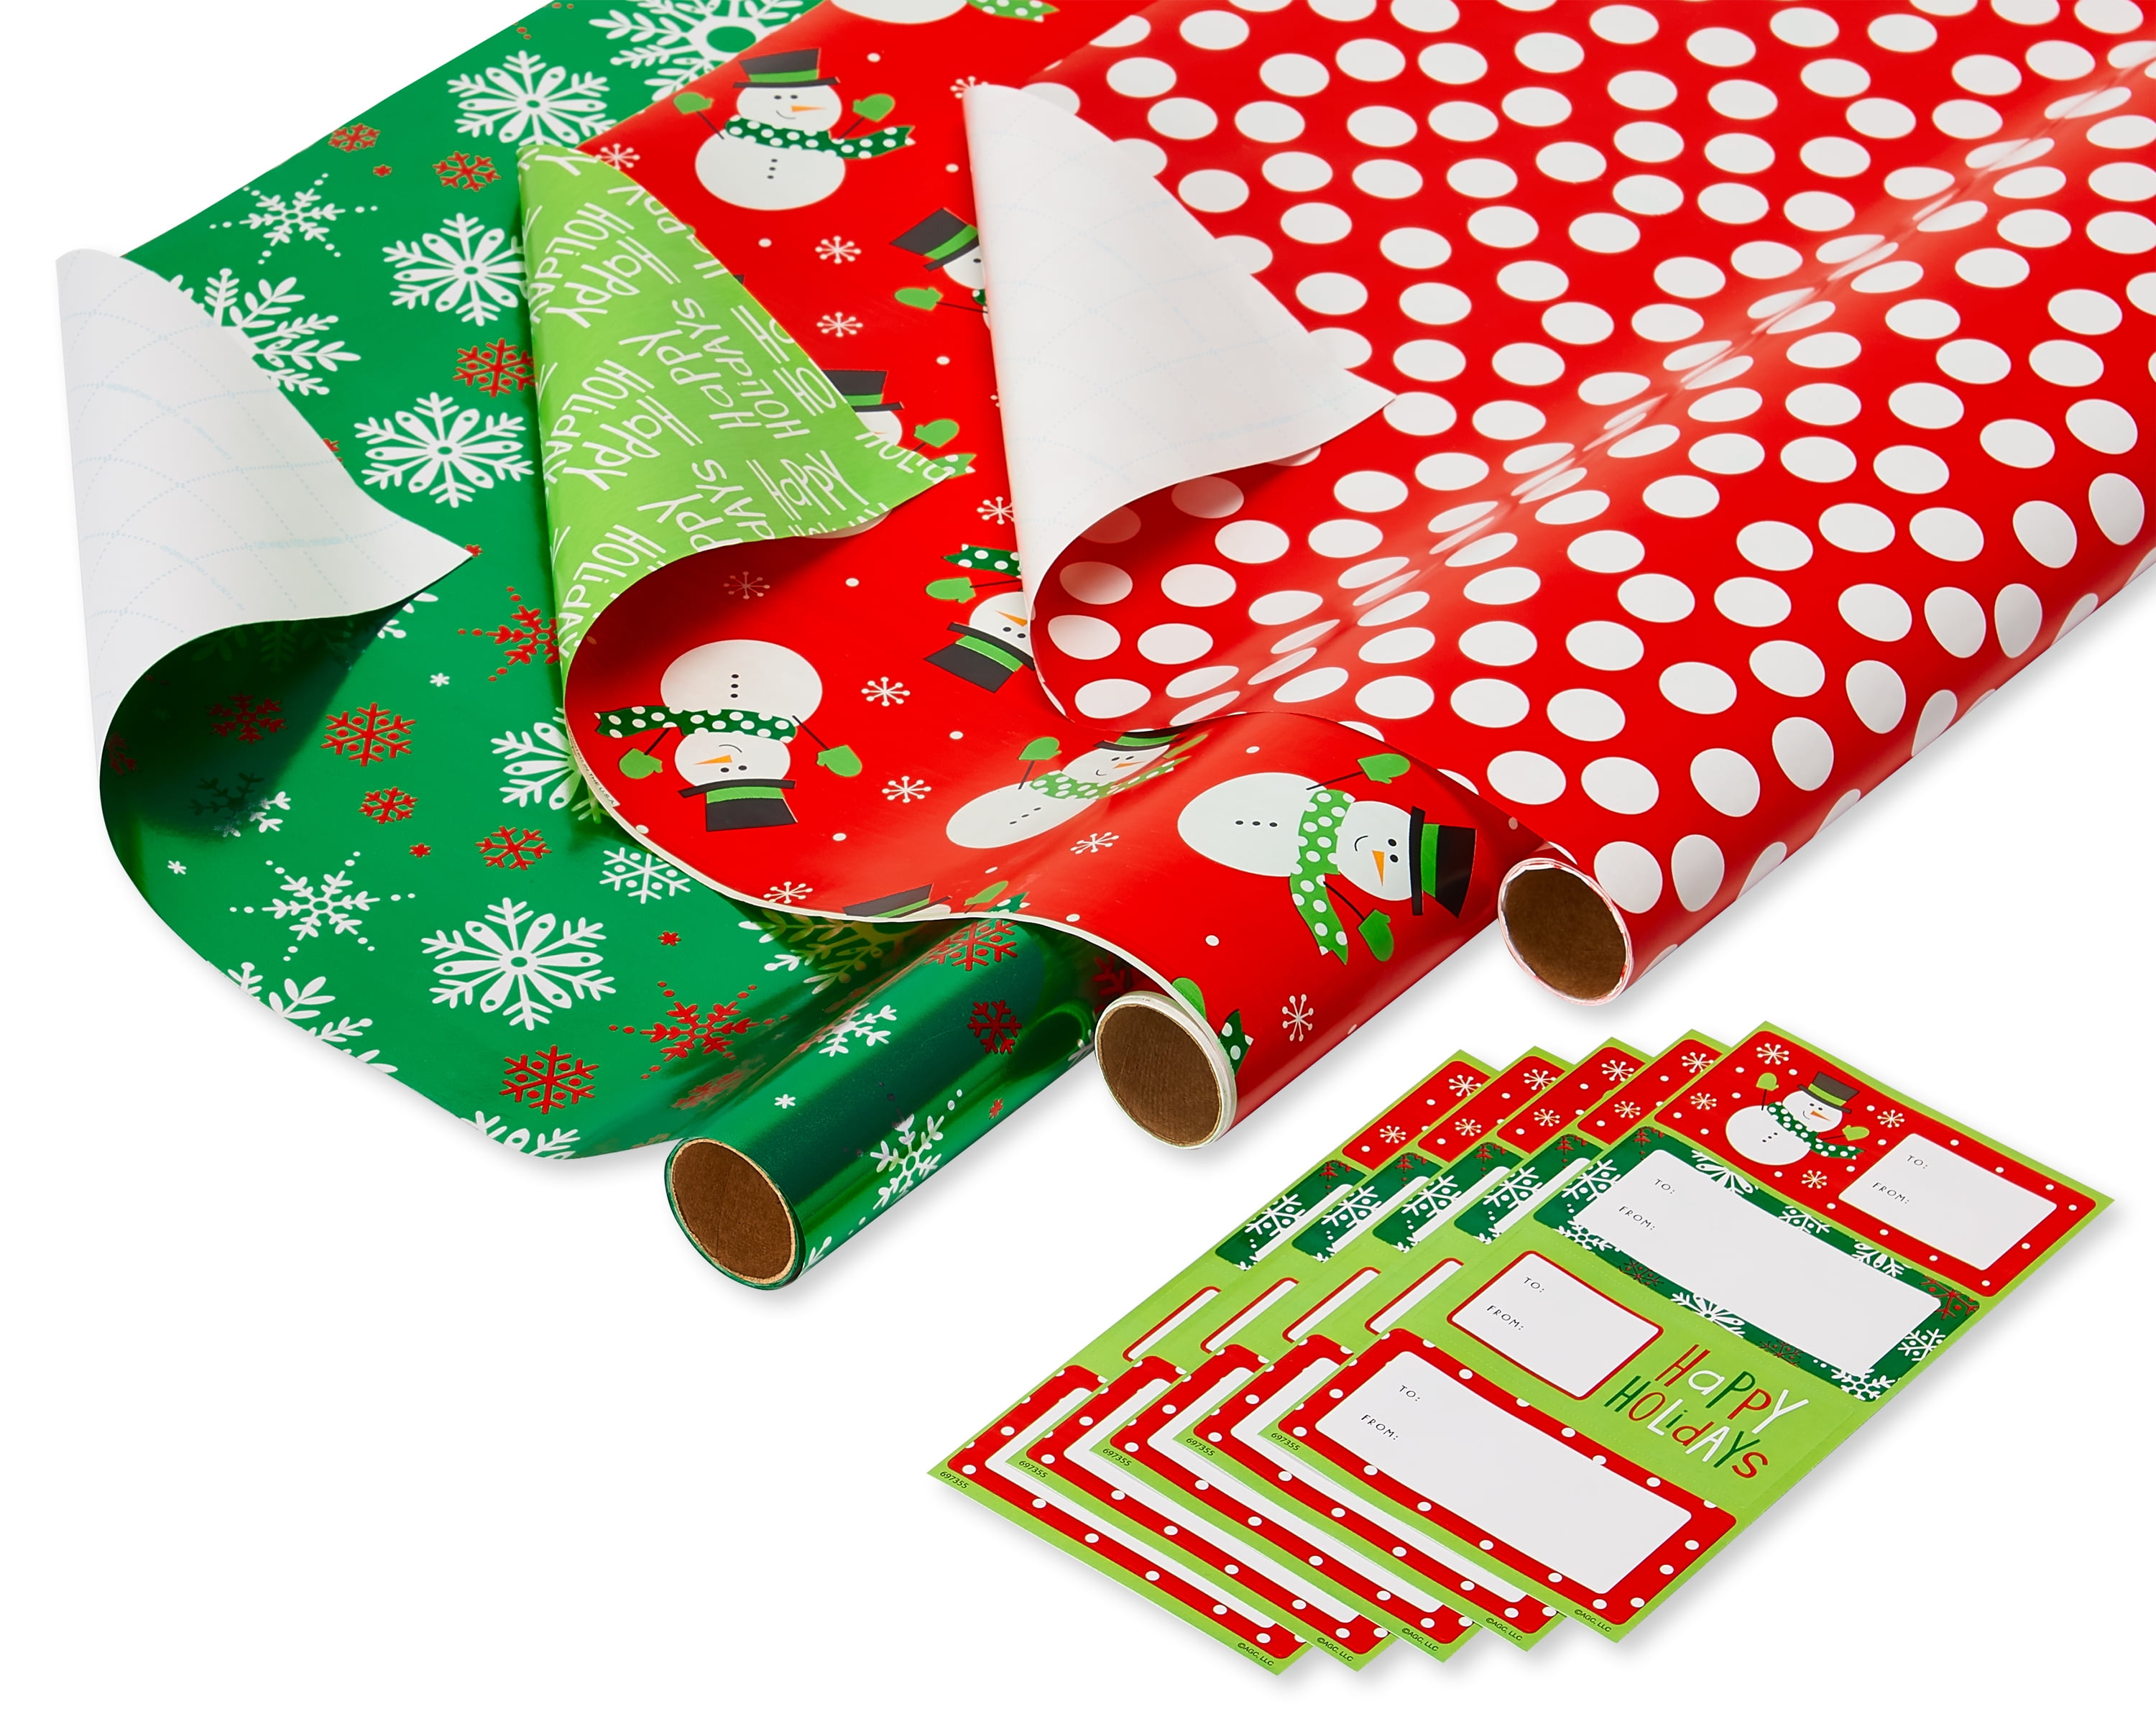 American Greetings Disney Characters Holiday Gridline Wrapping